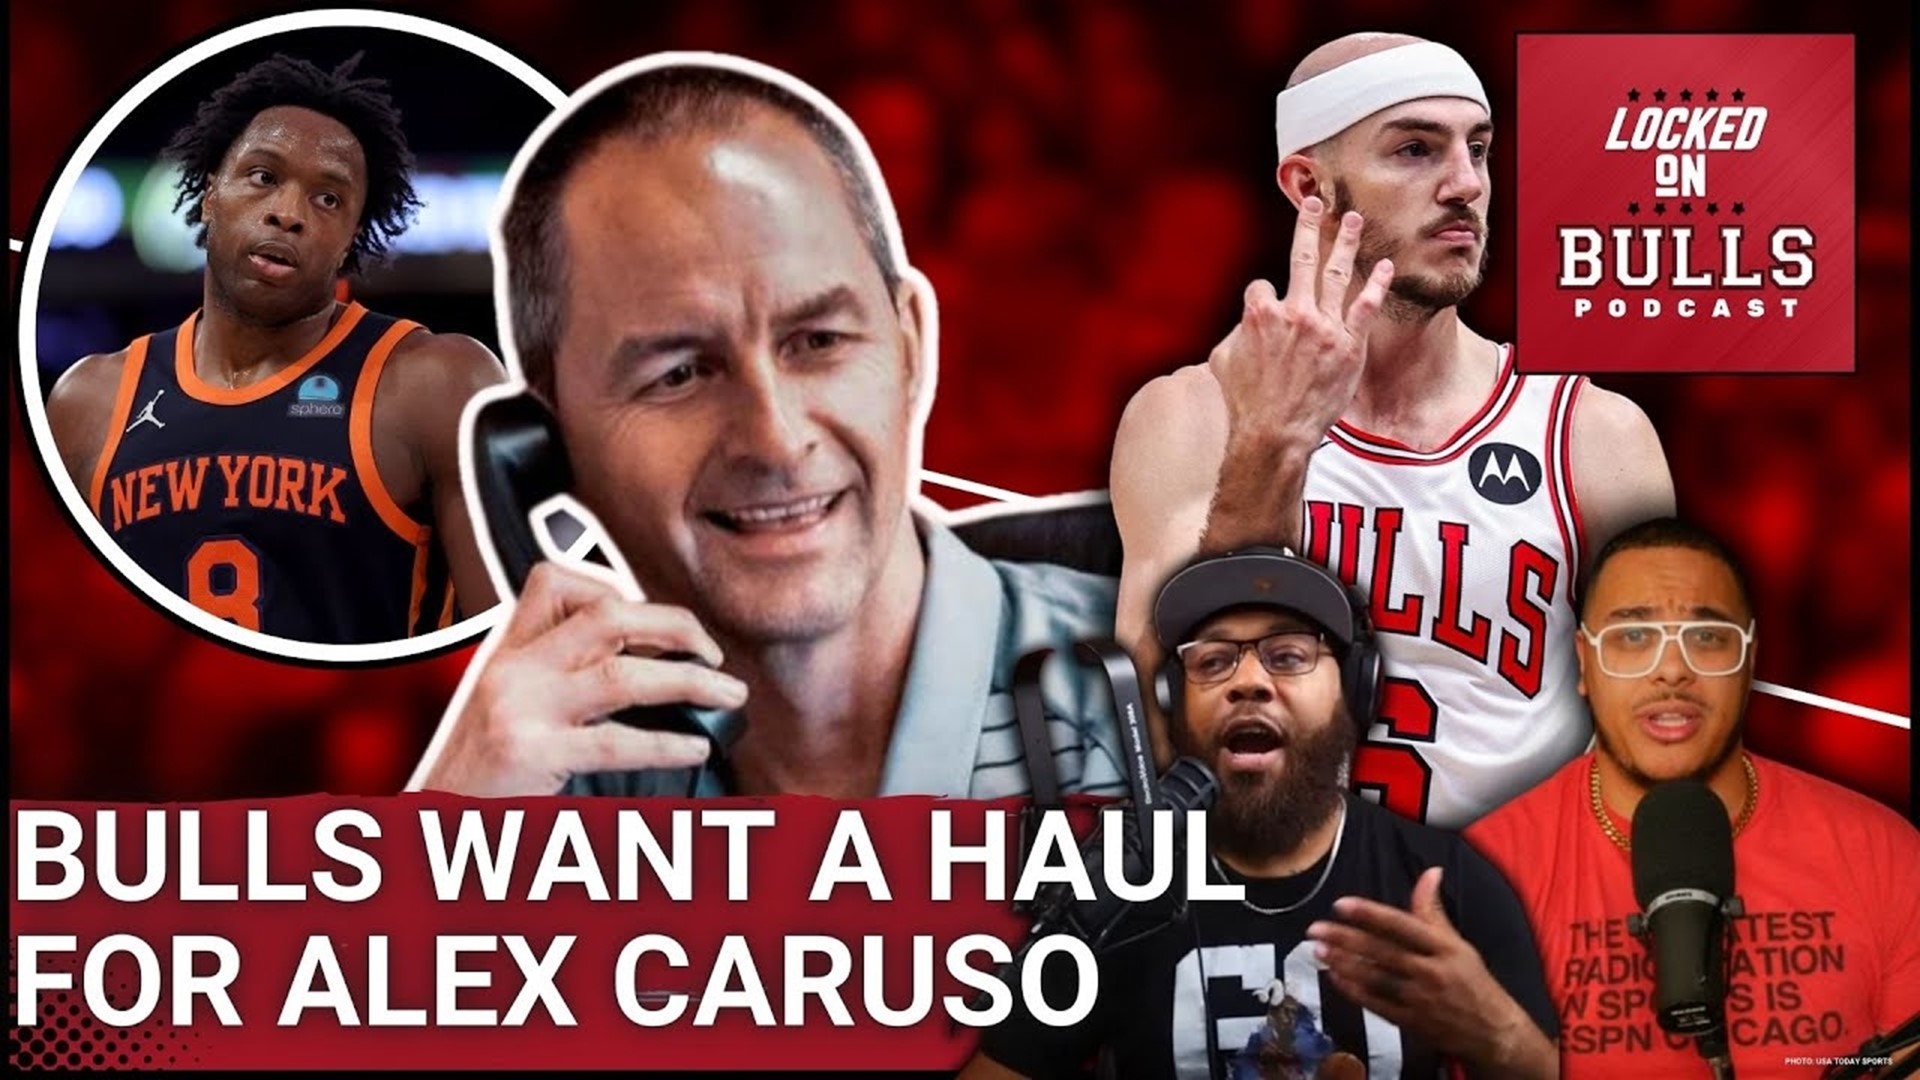 Haize & Pat The Designer discuss what the Chicago Bulls are looking for back in an Alex Caruso trade. They also talk about teams being interested in Andre Drummond.